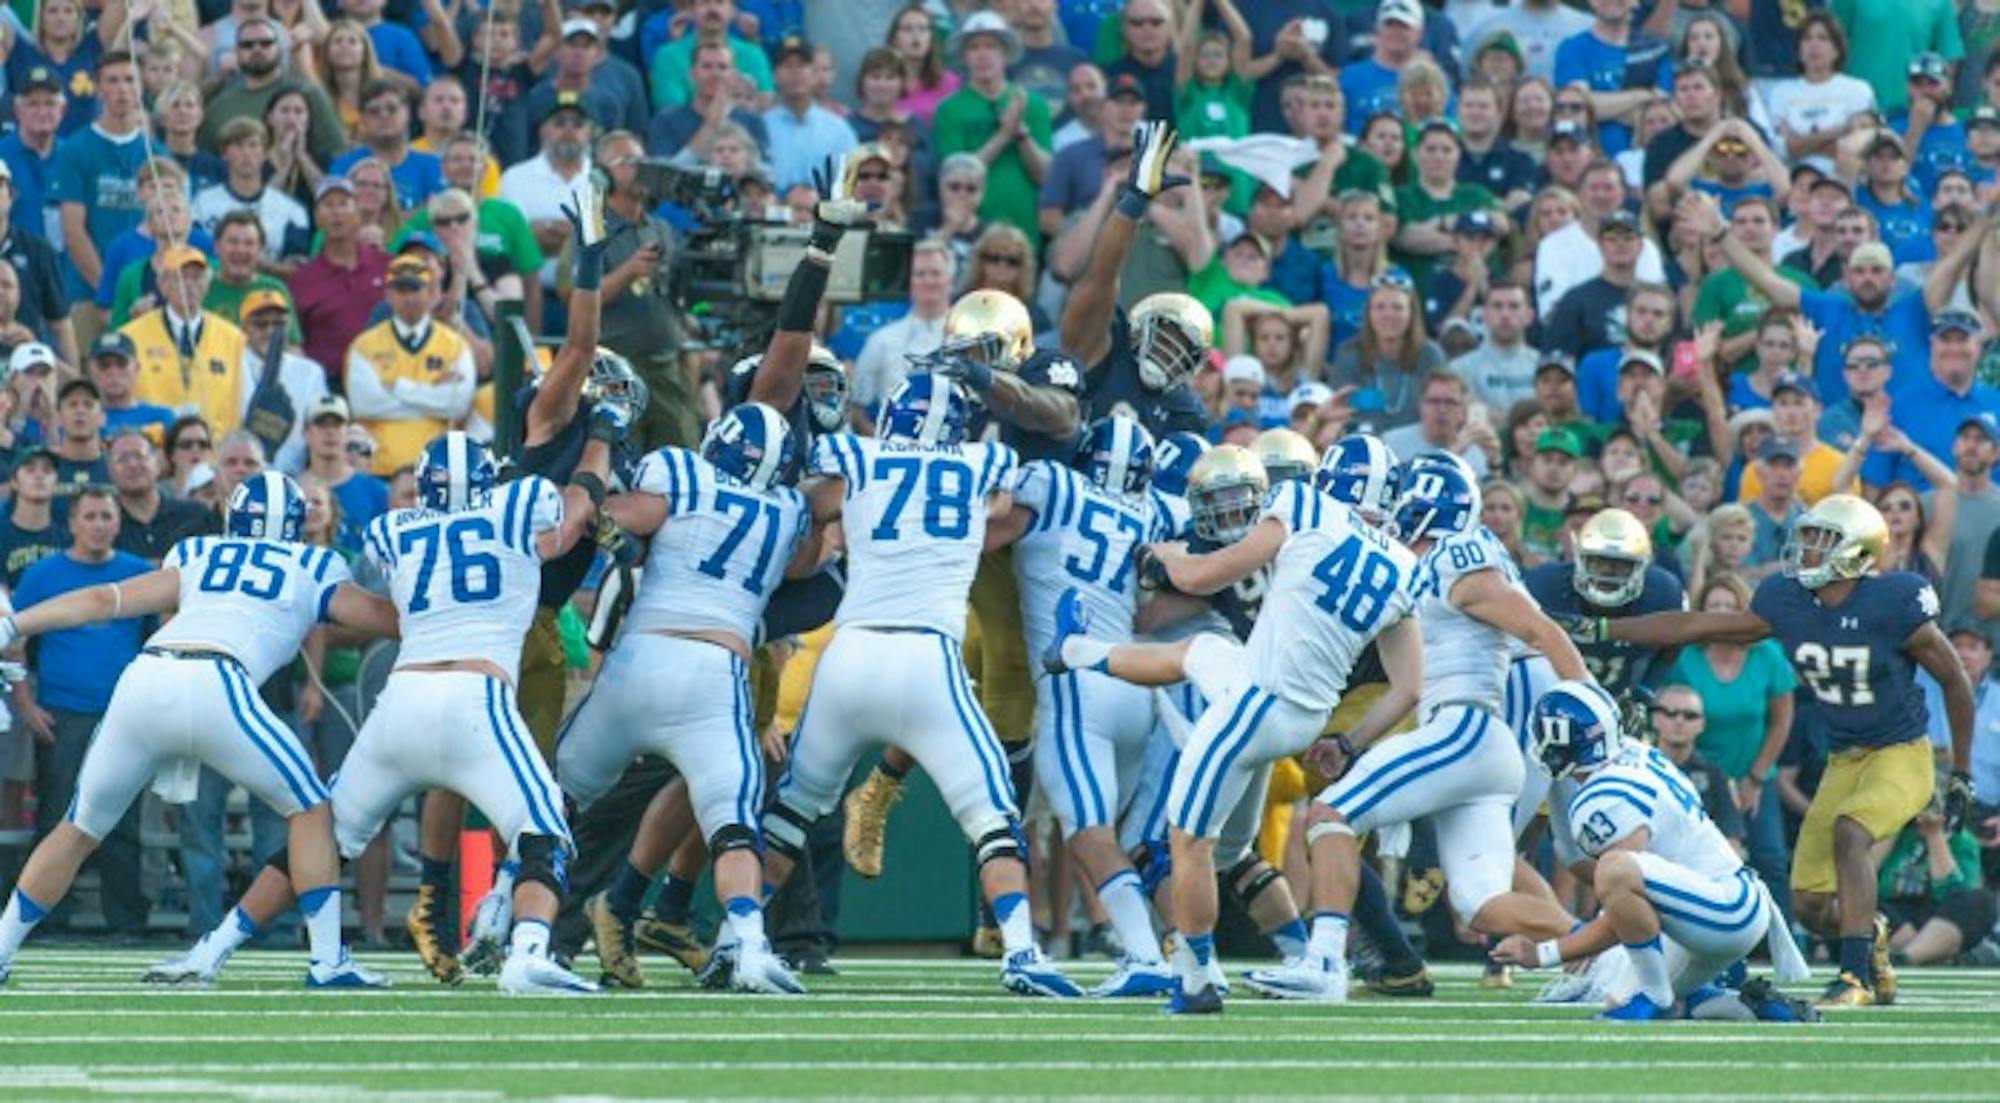 Blue Devil freshman kicker AJ Reed sends the game-winning field goal through the uprights during Duke’s 38-35 win over Notre Dame on Saturday at Notre Dame Stadium. It was Reed’s only field goal of the game.